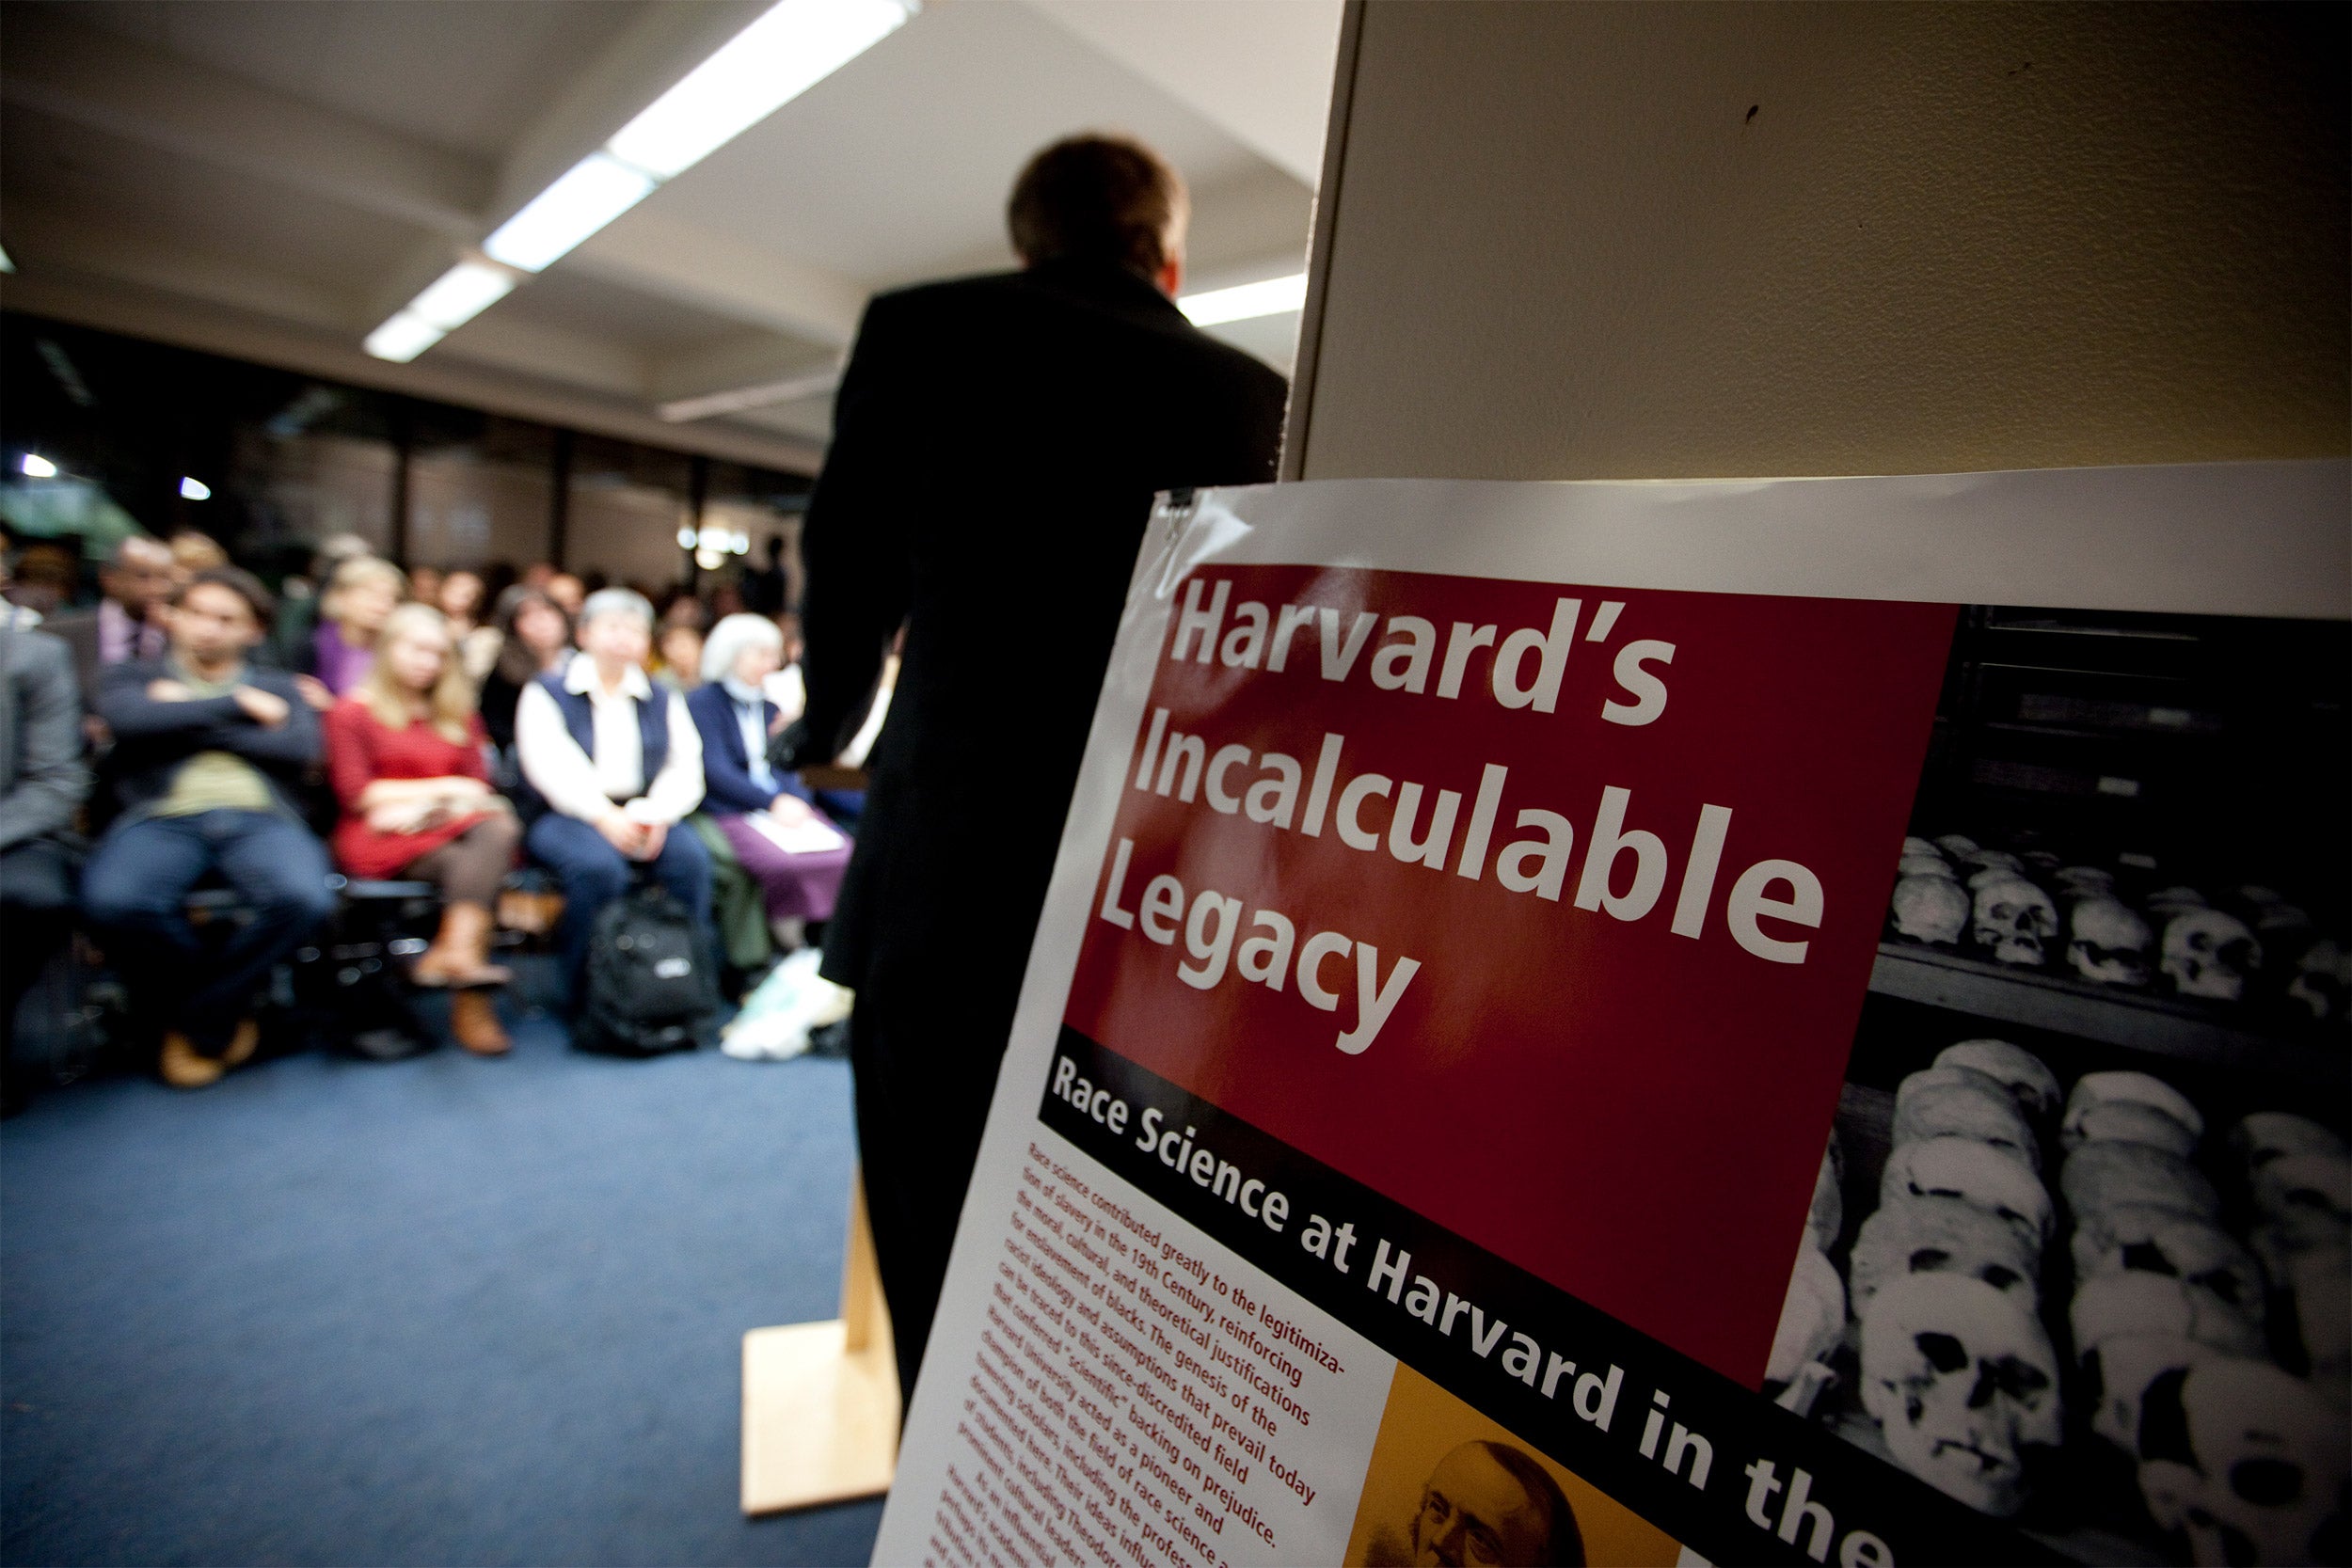 A lecture poster on slavery and Harvad.